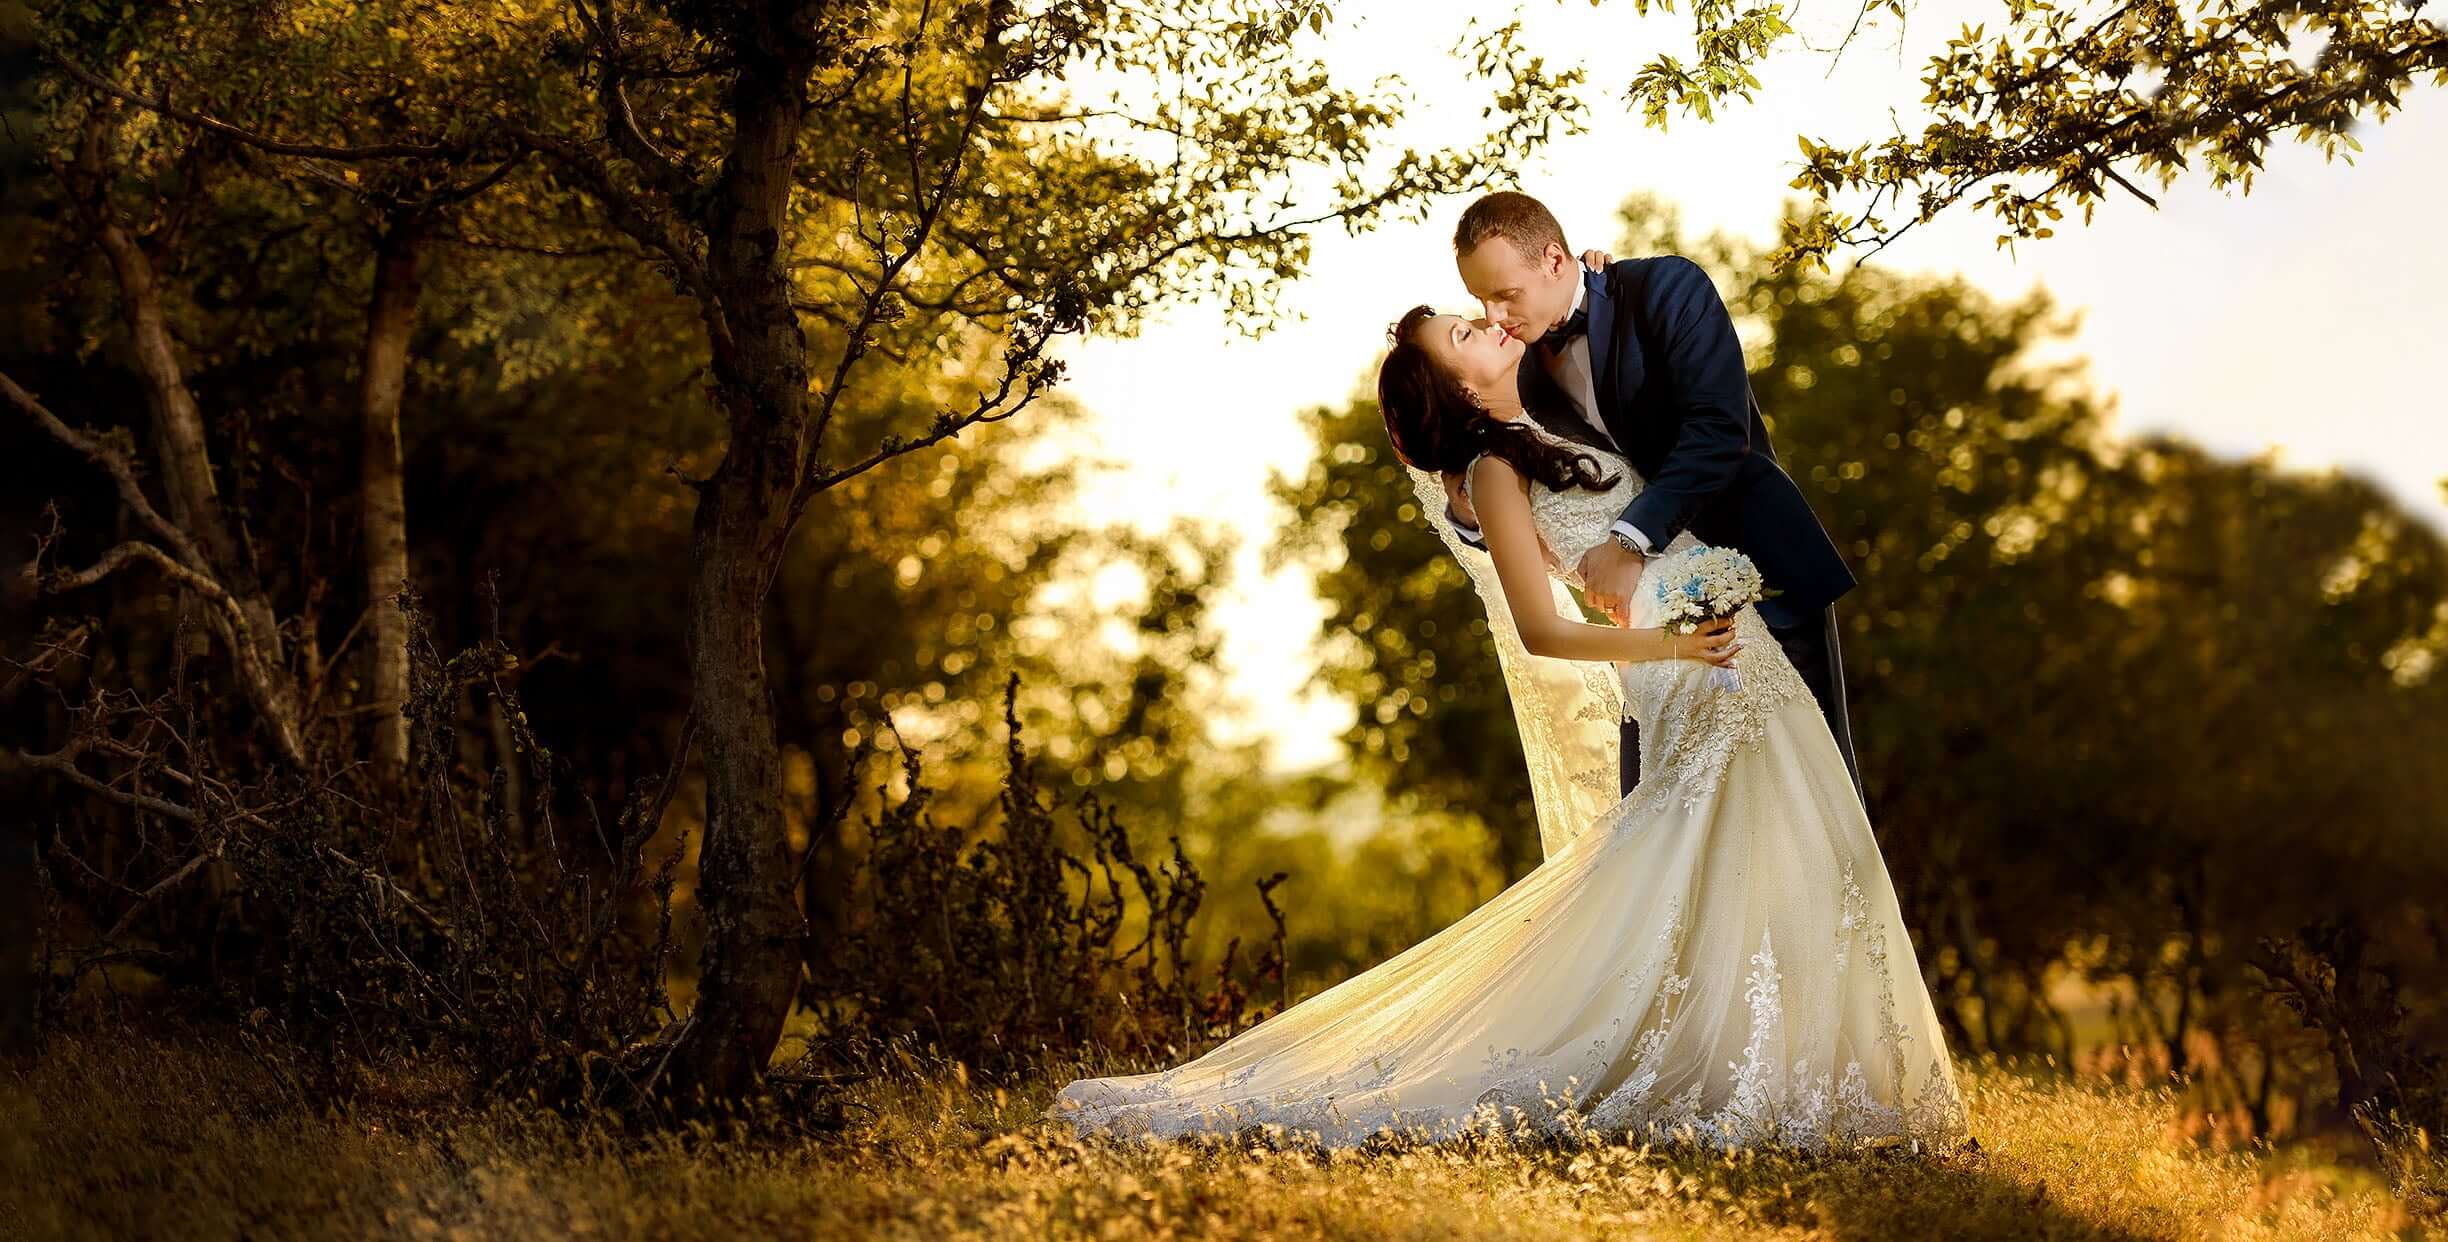 Professional Wedding Photography Montreal Xphotography.ca